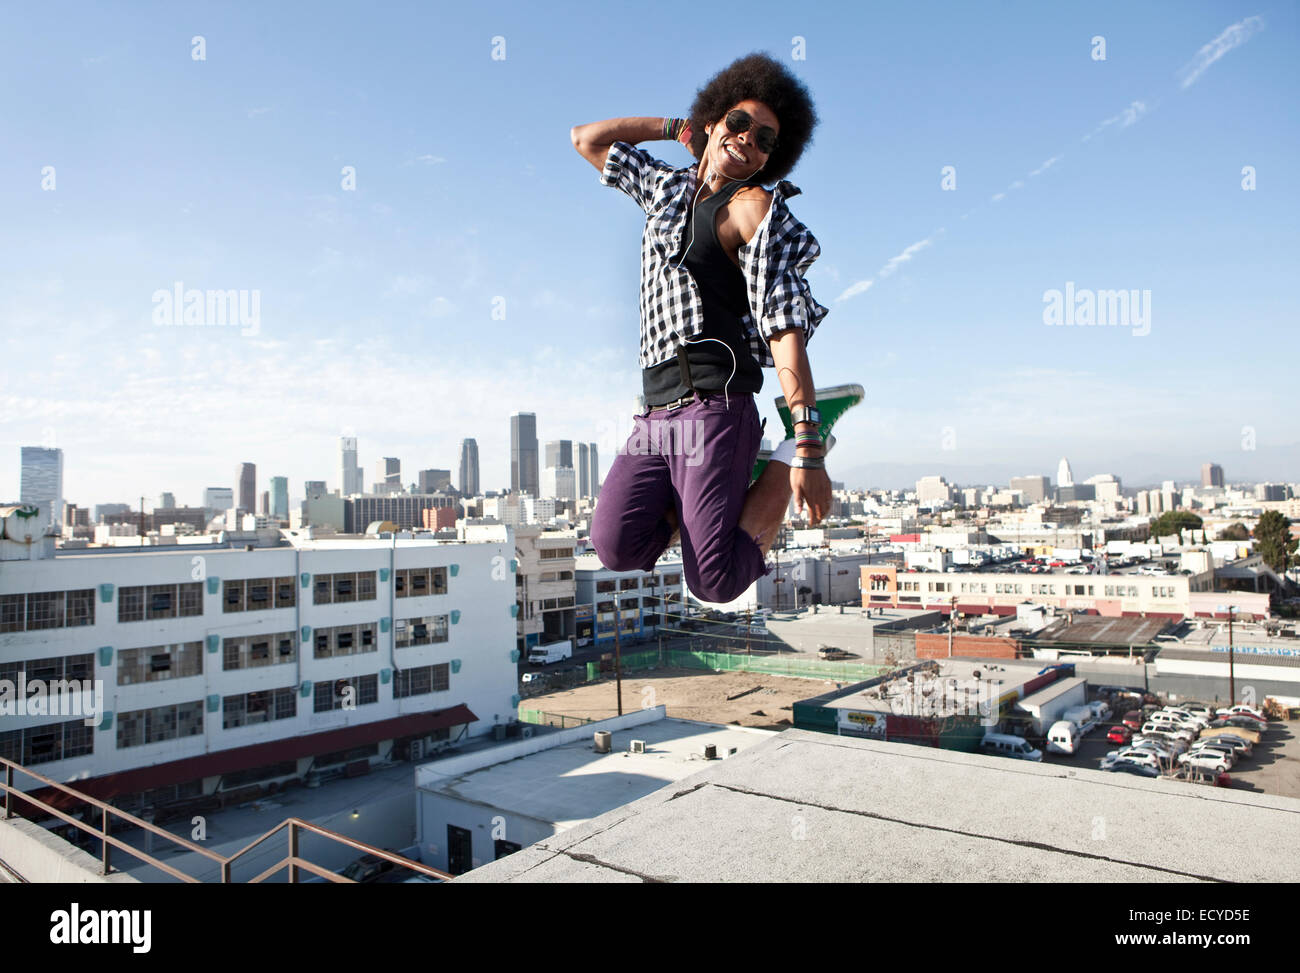 African American man jumping for joy on urban rooftop Stock Photo